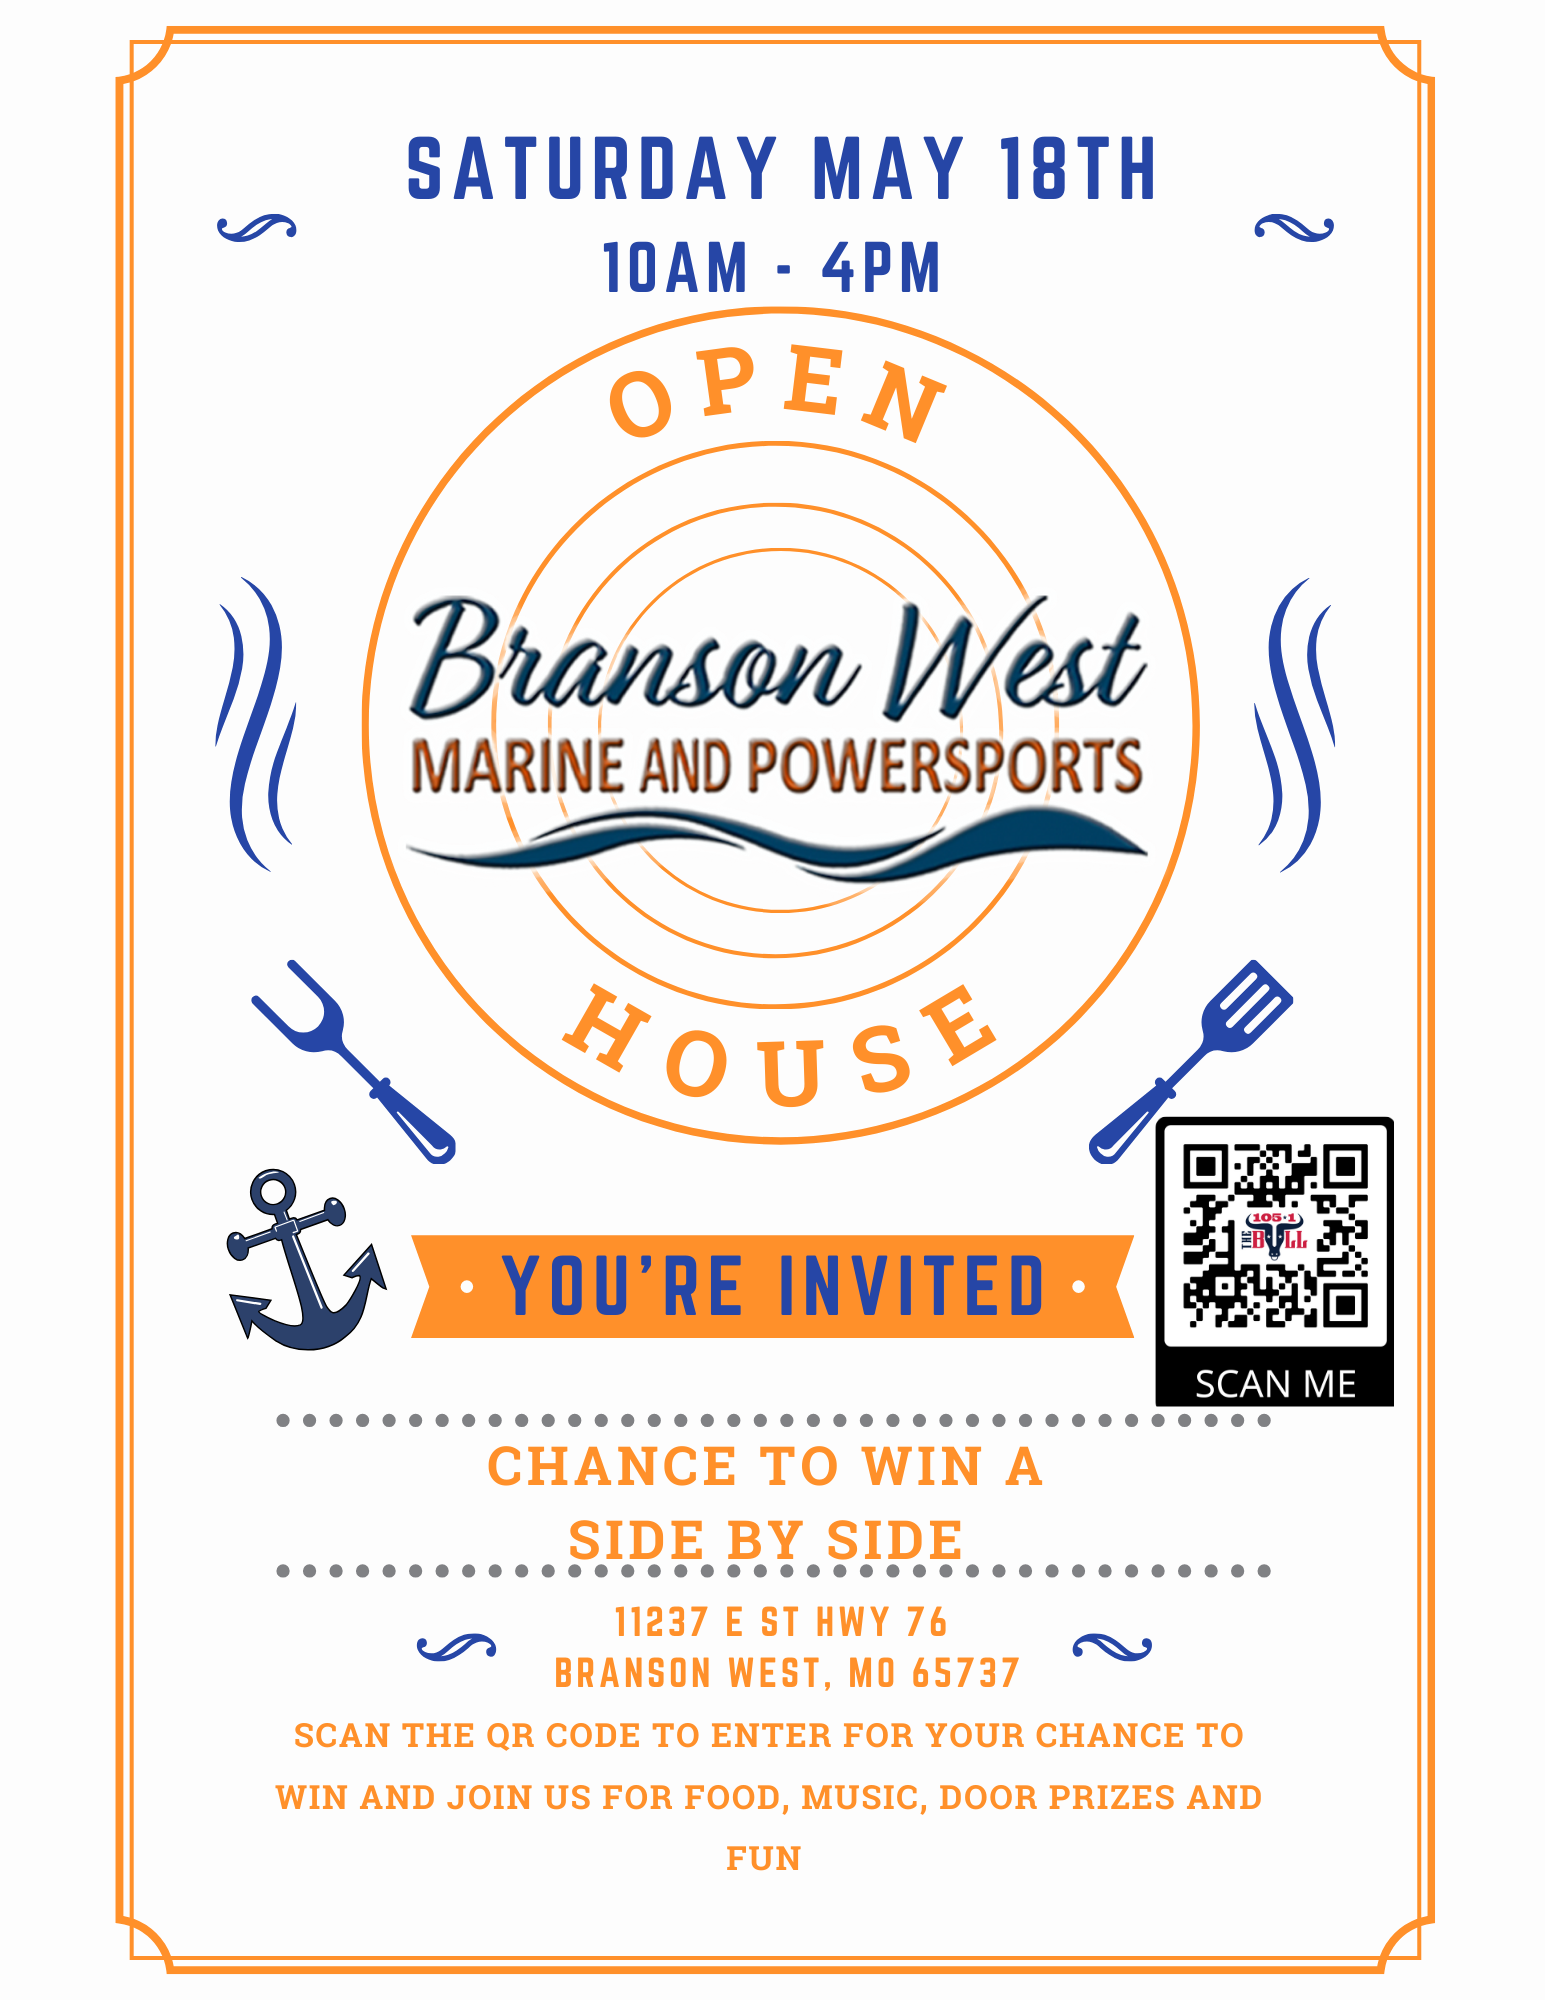 Don't Miss the Branson West Marine and Power Sports Open House